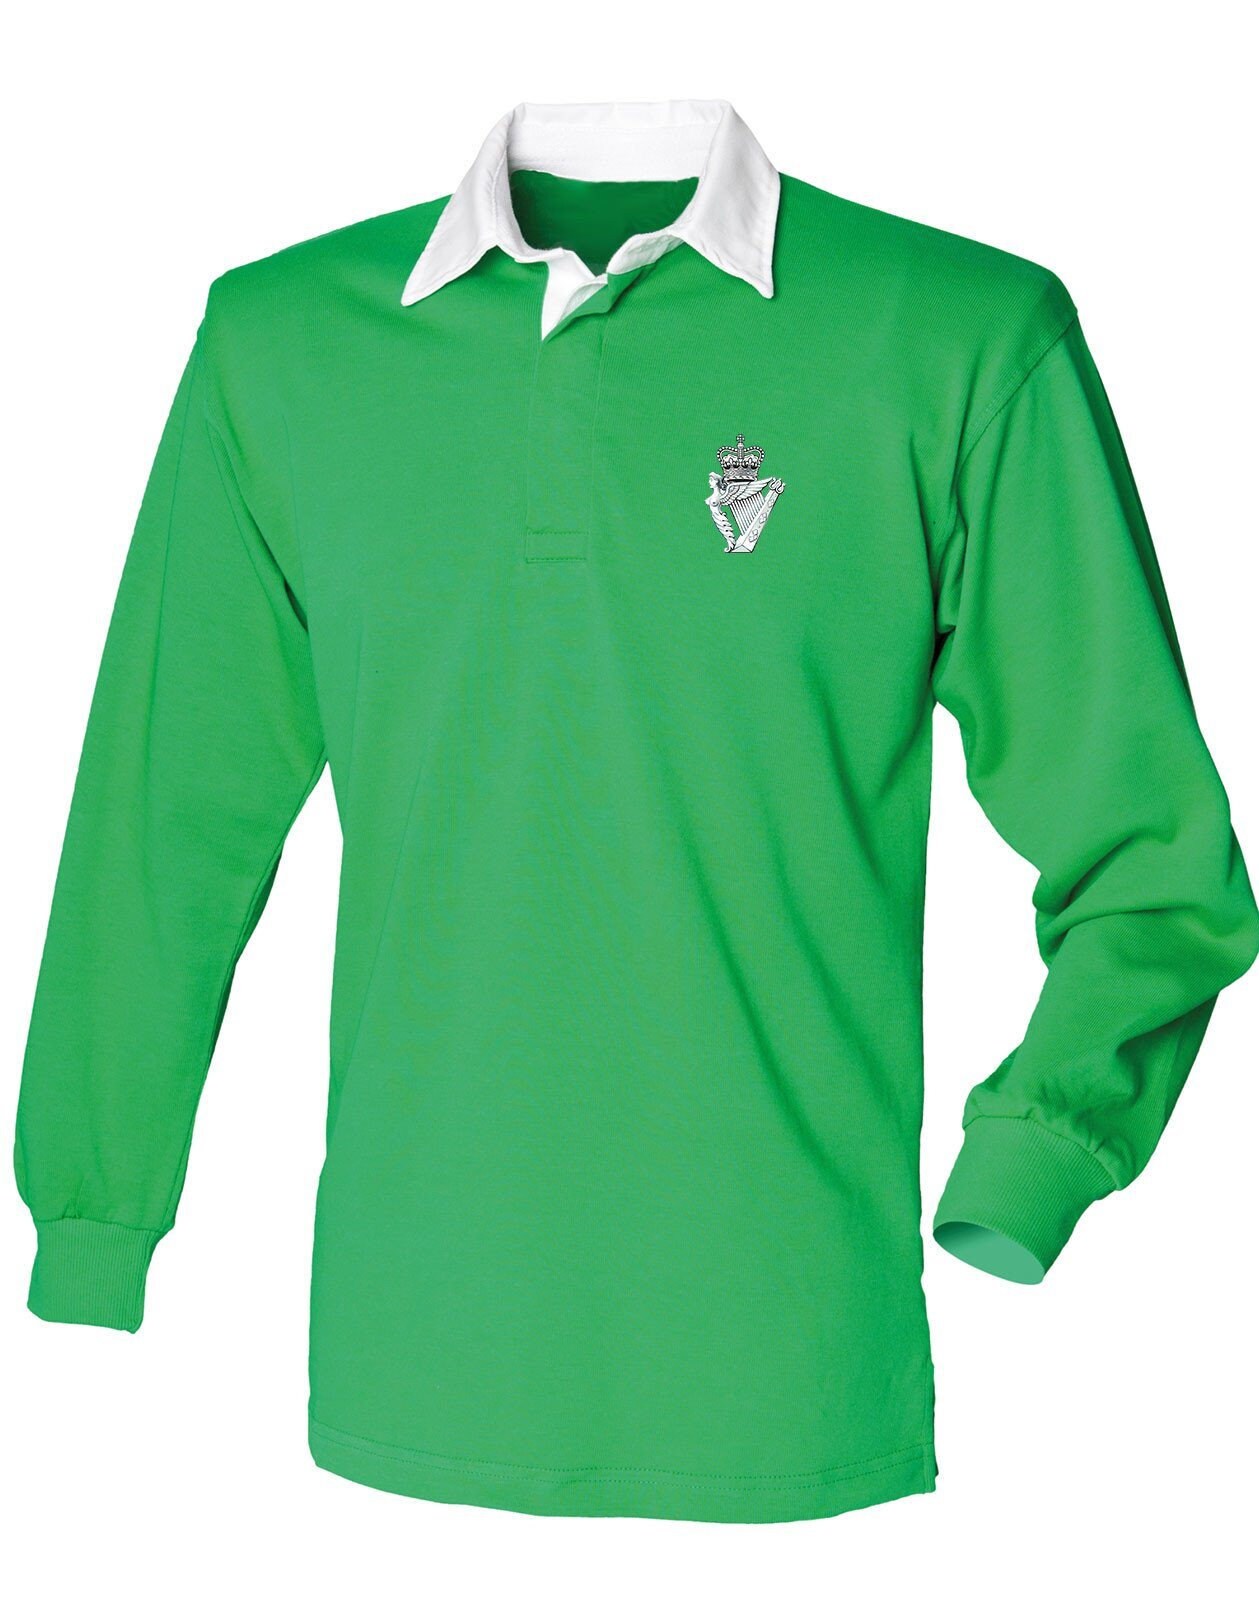 Super Lemon Ireland Irish Adults Rugby Exclusive Retro Vintage Mens Womens Unisex Green Polo Shirt Great for Any Ireland Rugby Fans for 6 Nations and World Cup Available Upto 3XL 